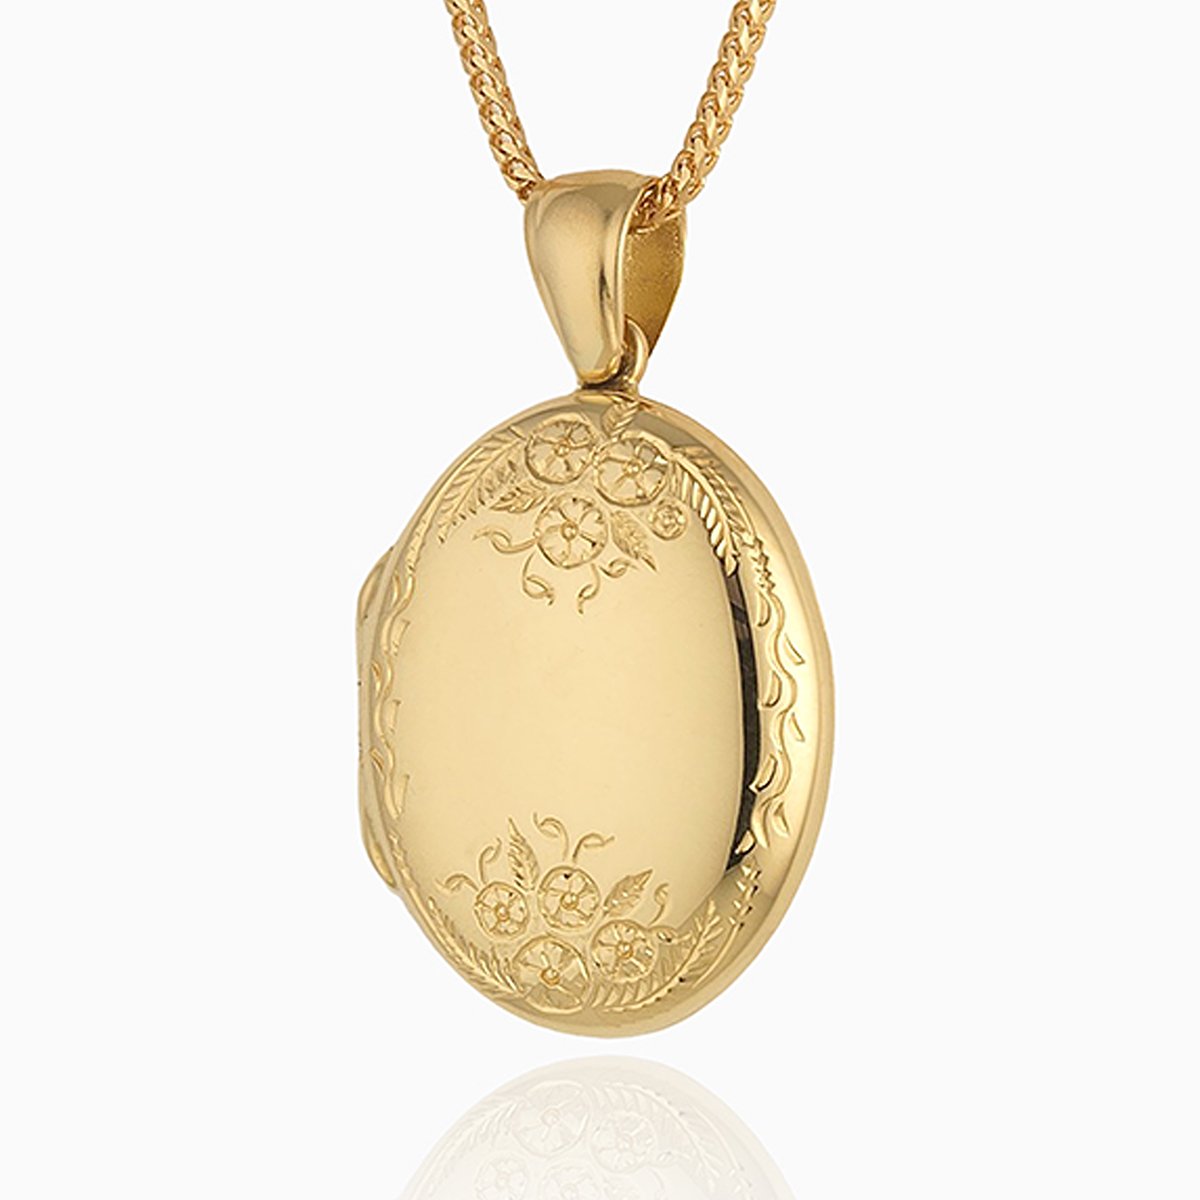 18 ct gold oval locket engraved with a floral design at the top and bottom of the locket, on an 18 ct gold franco chain